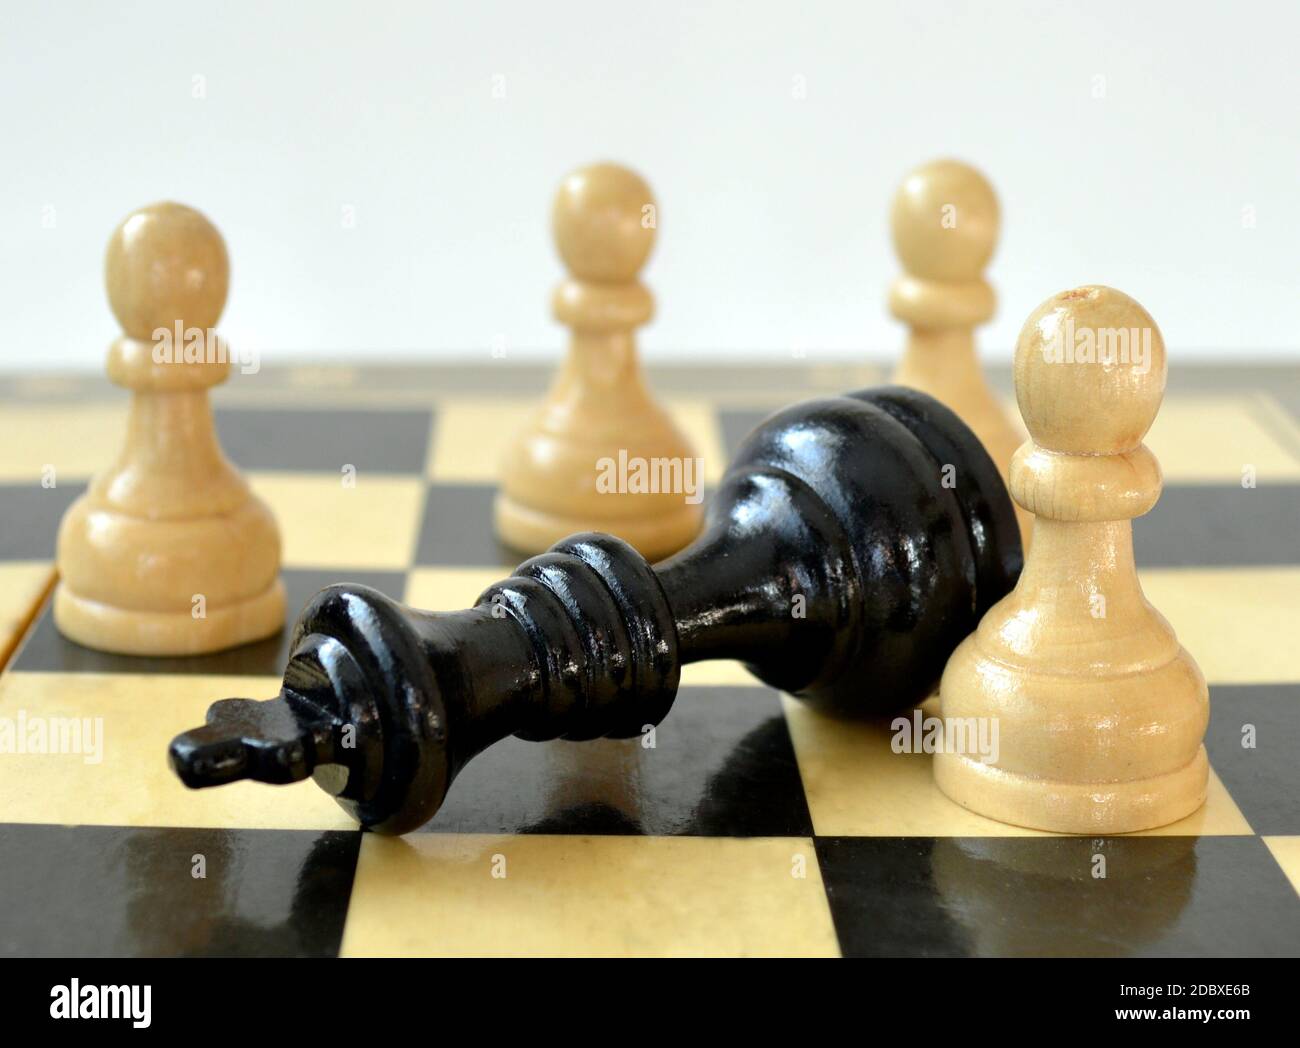 The white pawn defeated black king on chess board Stock Photo